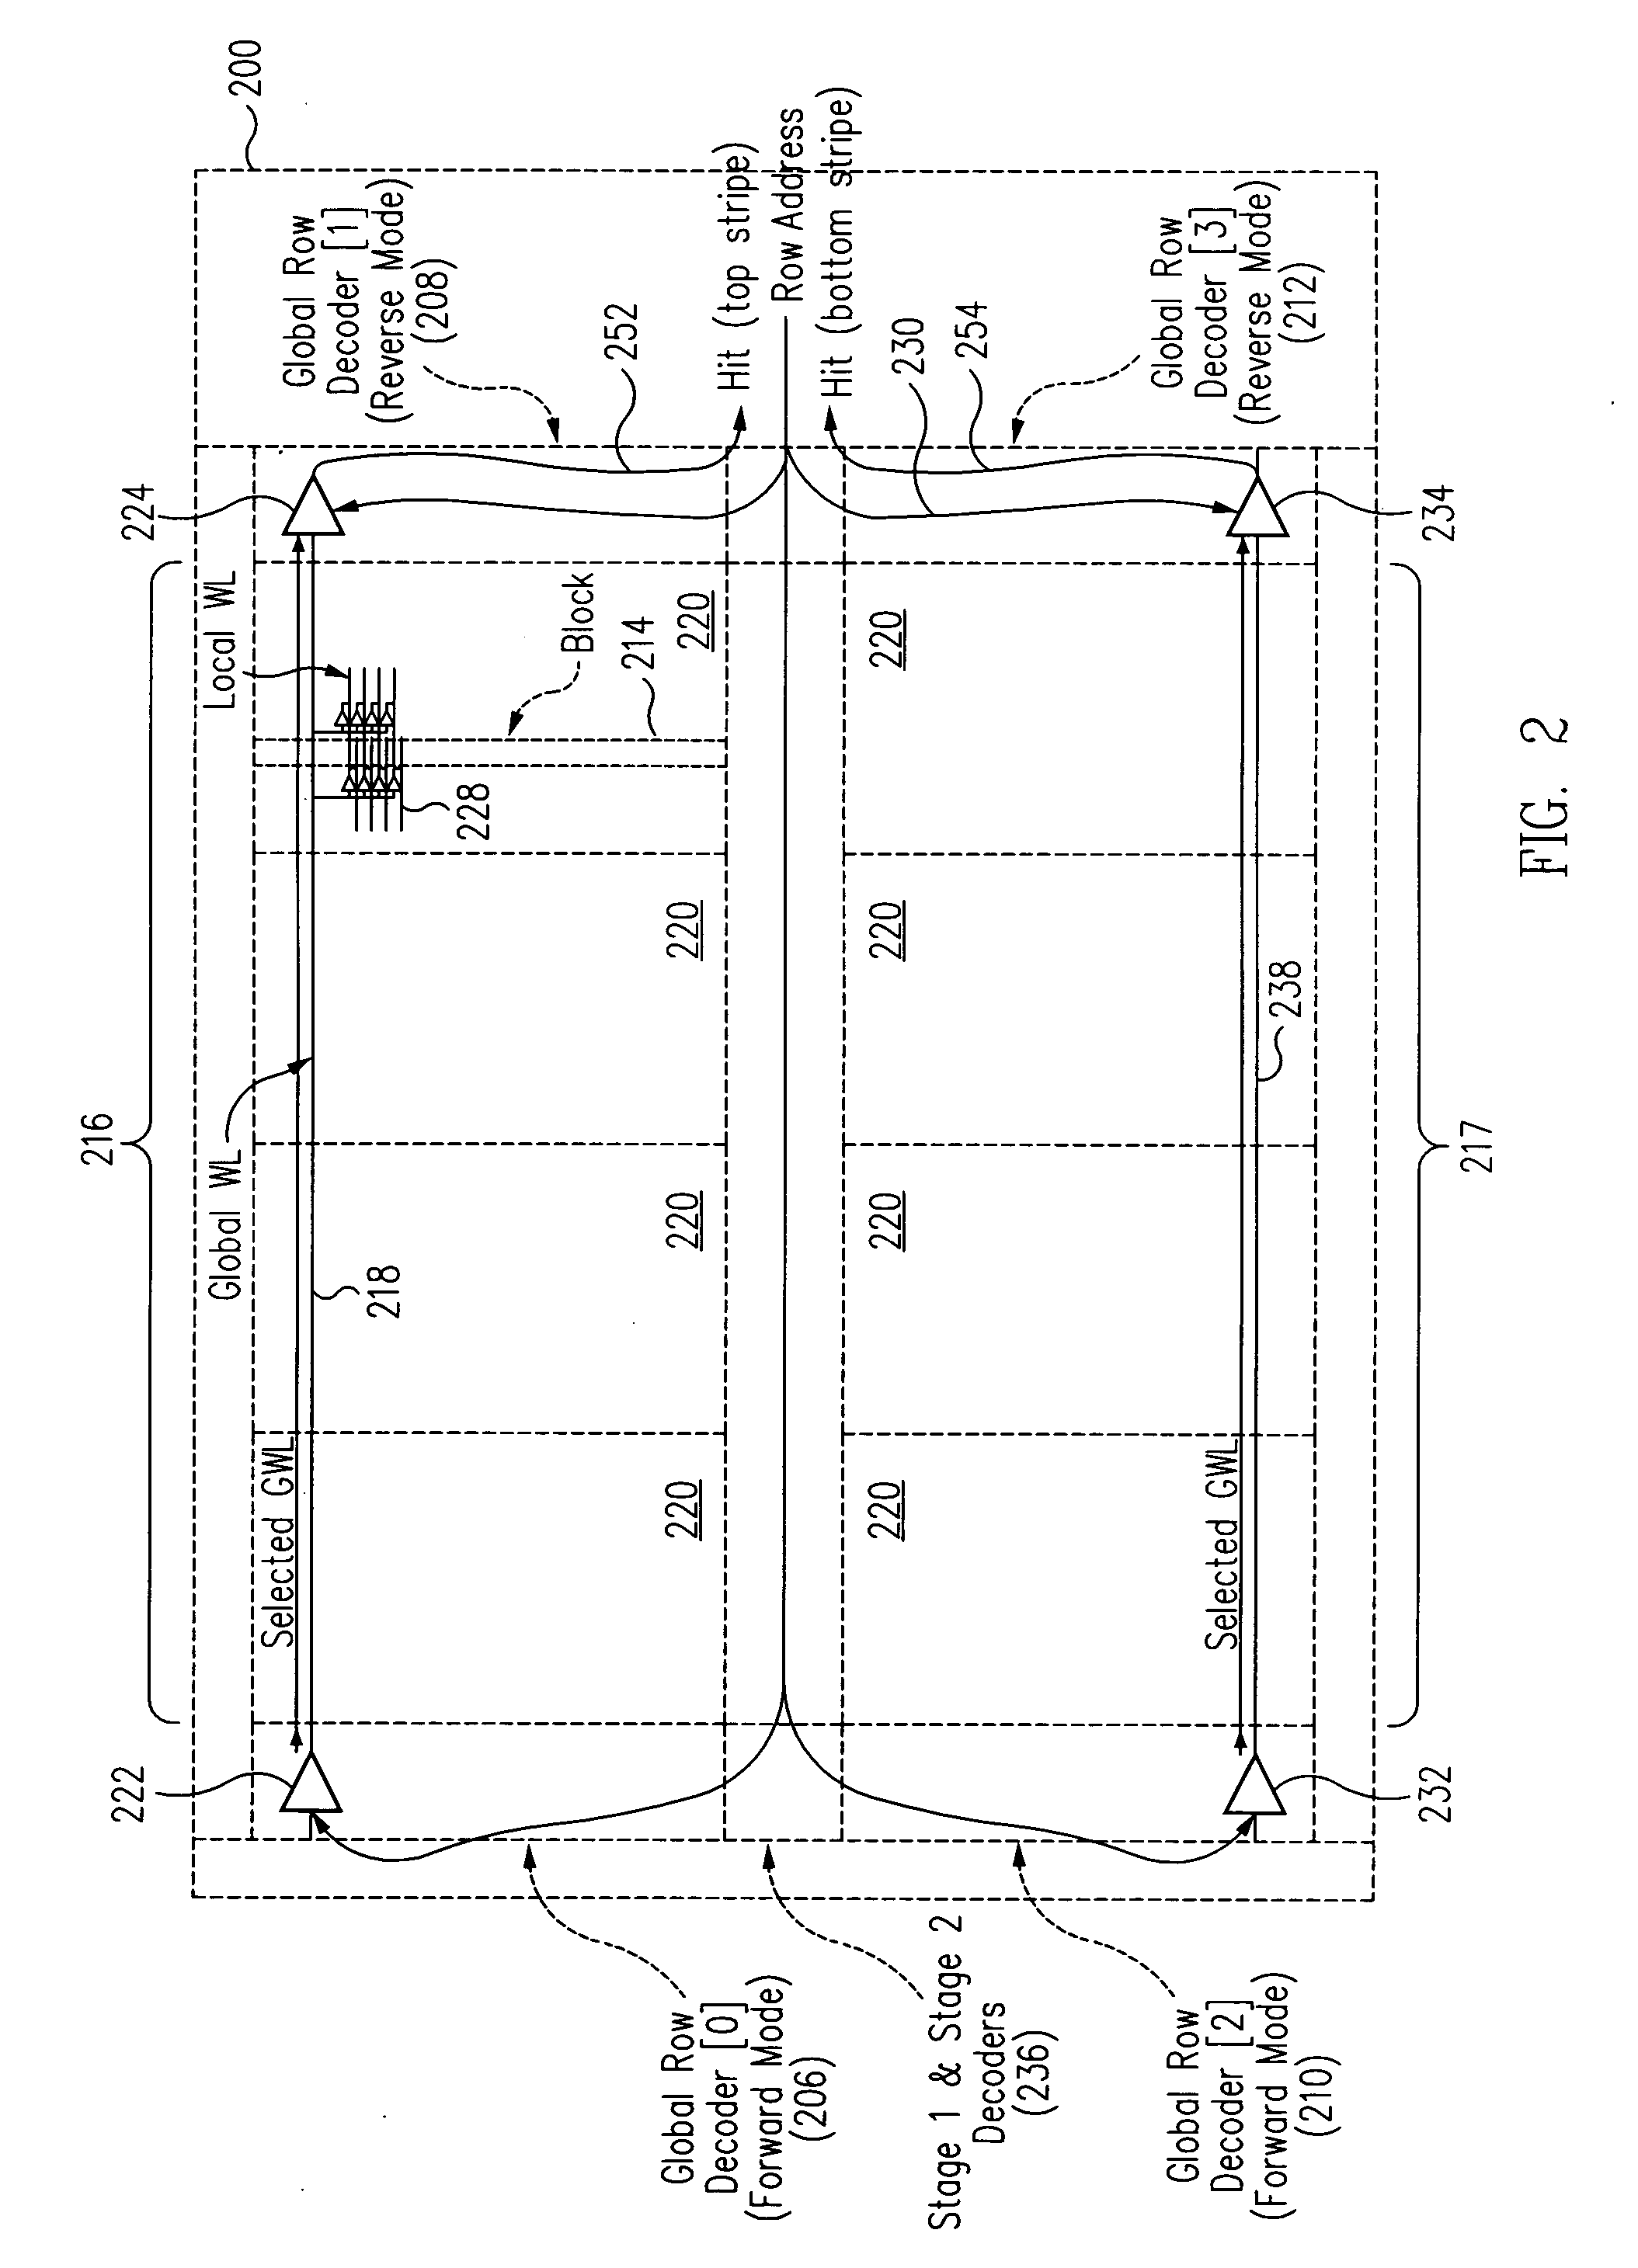 Dual-mode decoder circuit, integrated circuit memory array incorporating same, and related methods of operation